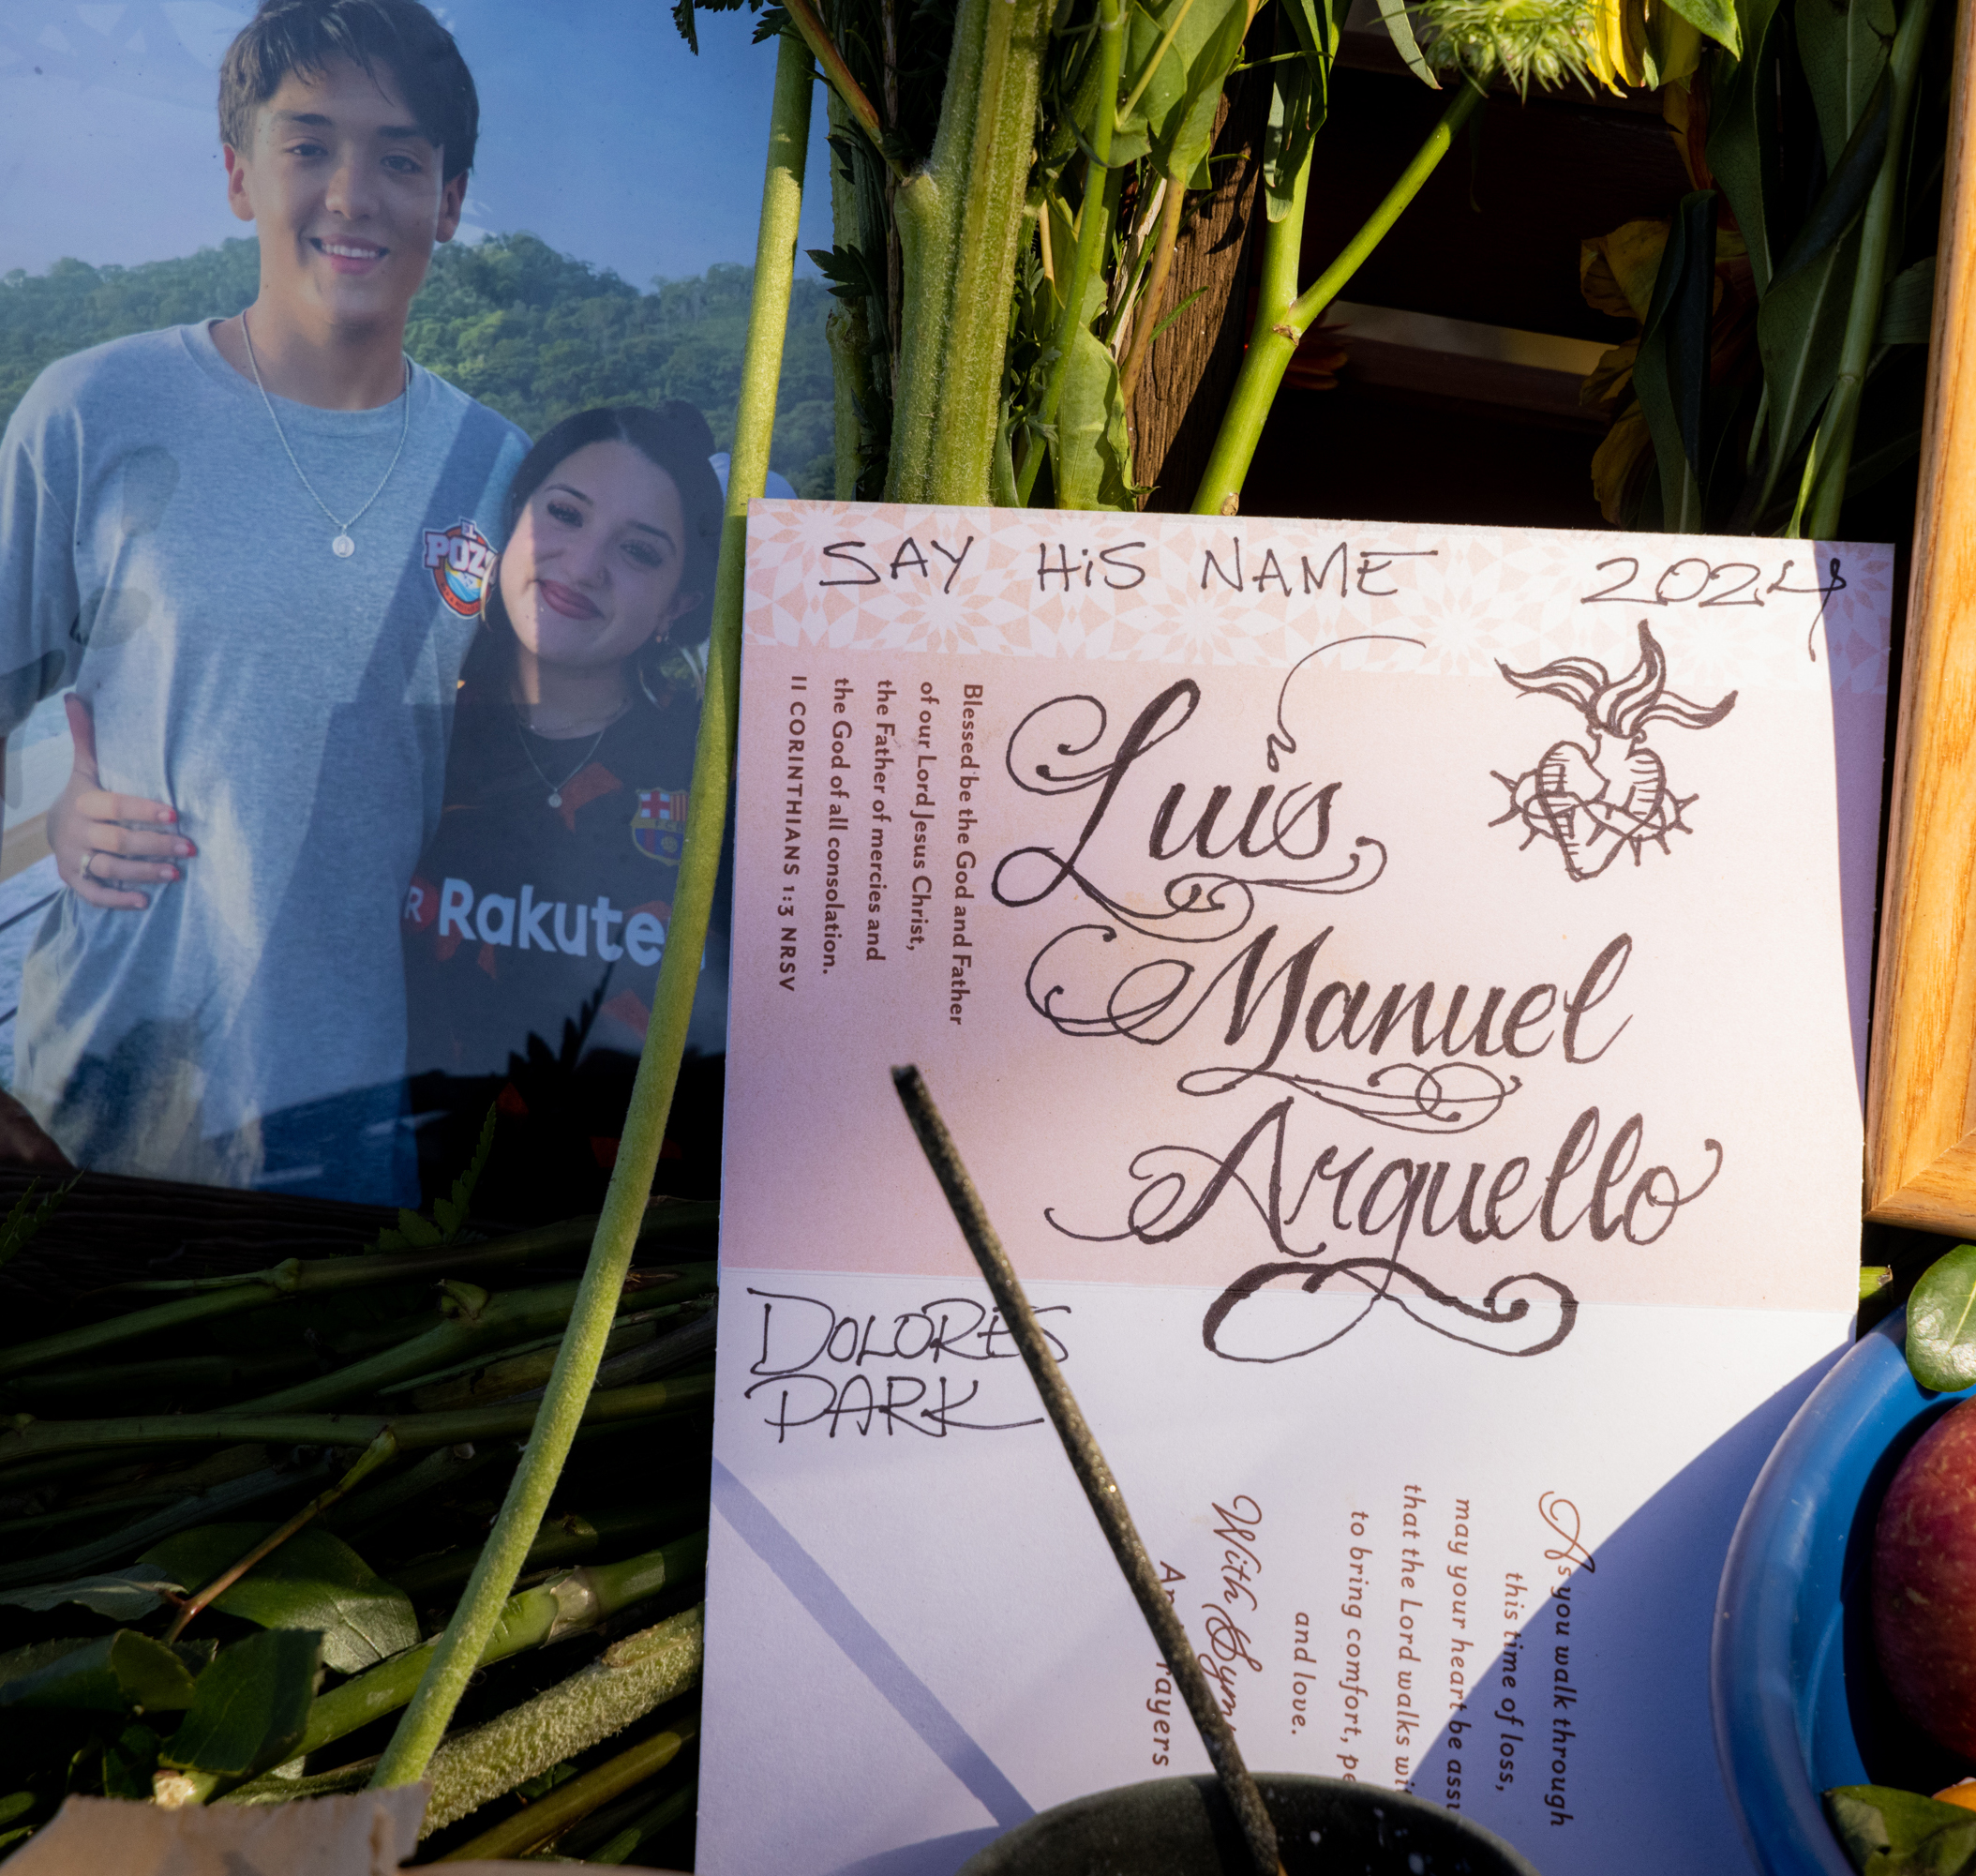 The image shows a remembrance setup with a photo of two smiling young individuals and a memorial card for Luis Manuel Arguello, surrounded by flowers and an apple.